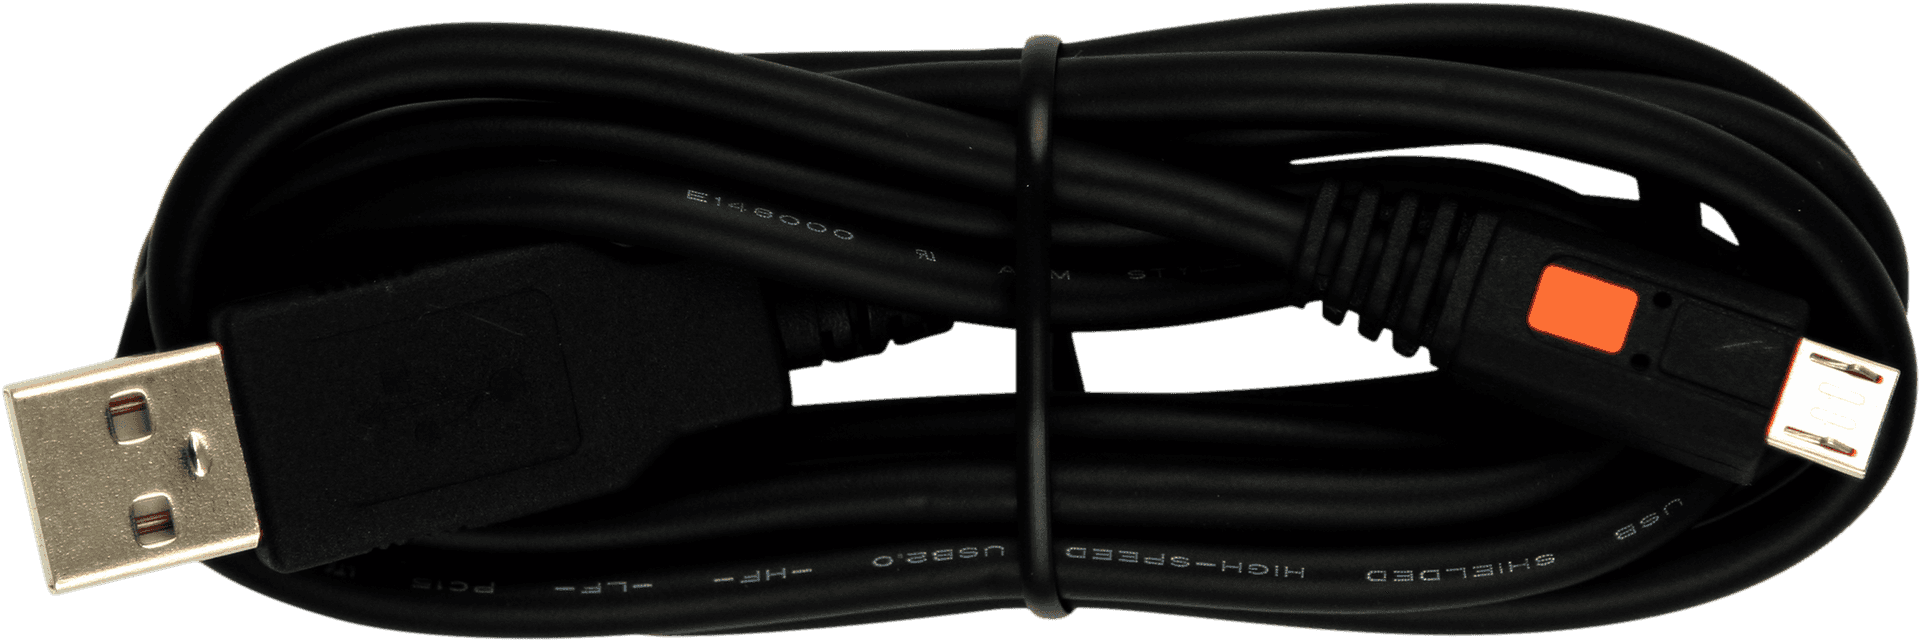 Black U S B Cablewith Red Accent PNG image